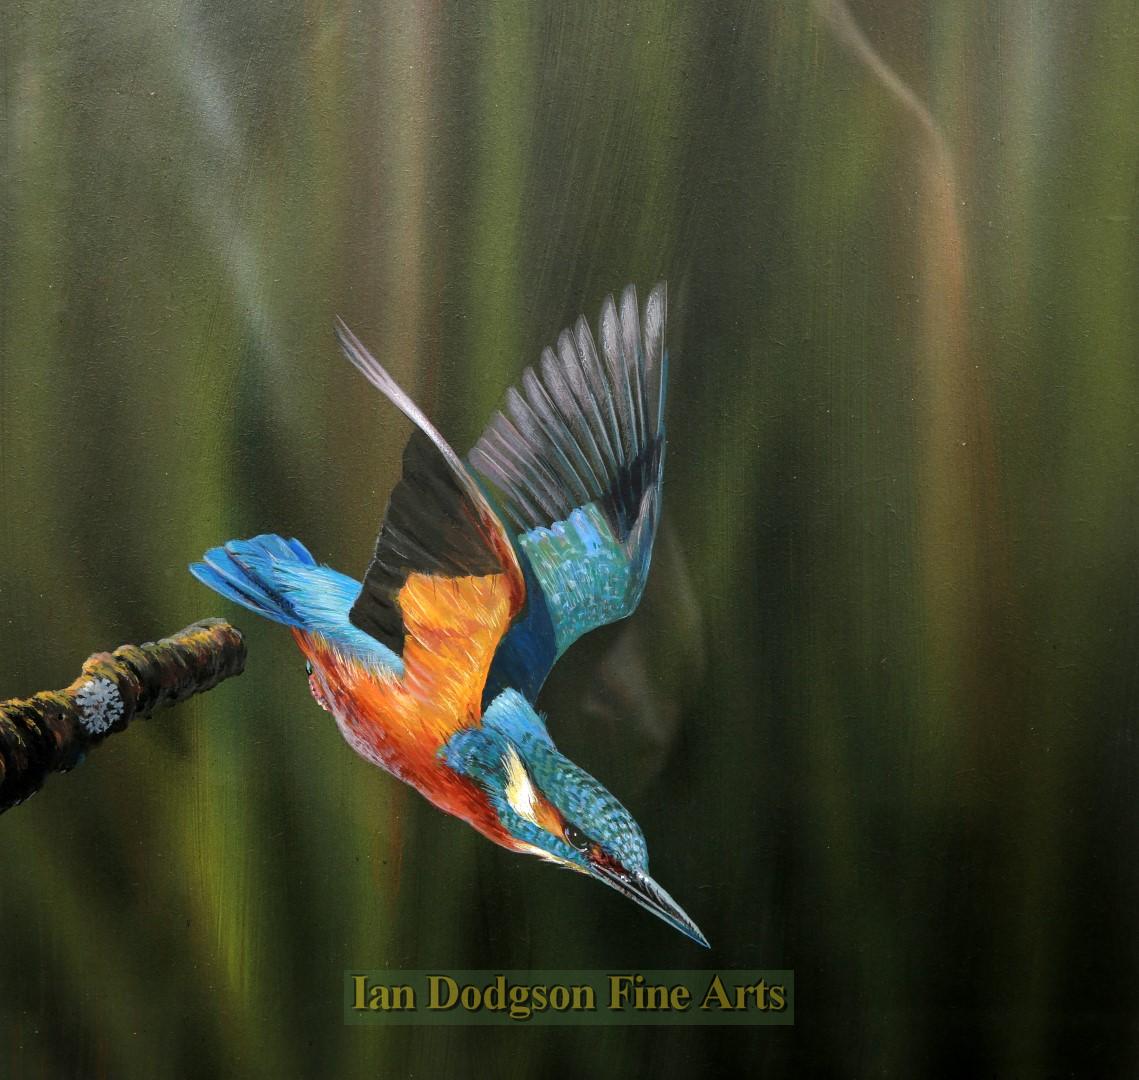 The Kingfisher by Richard Duffield 